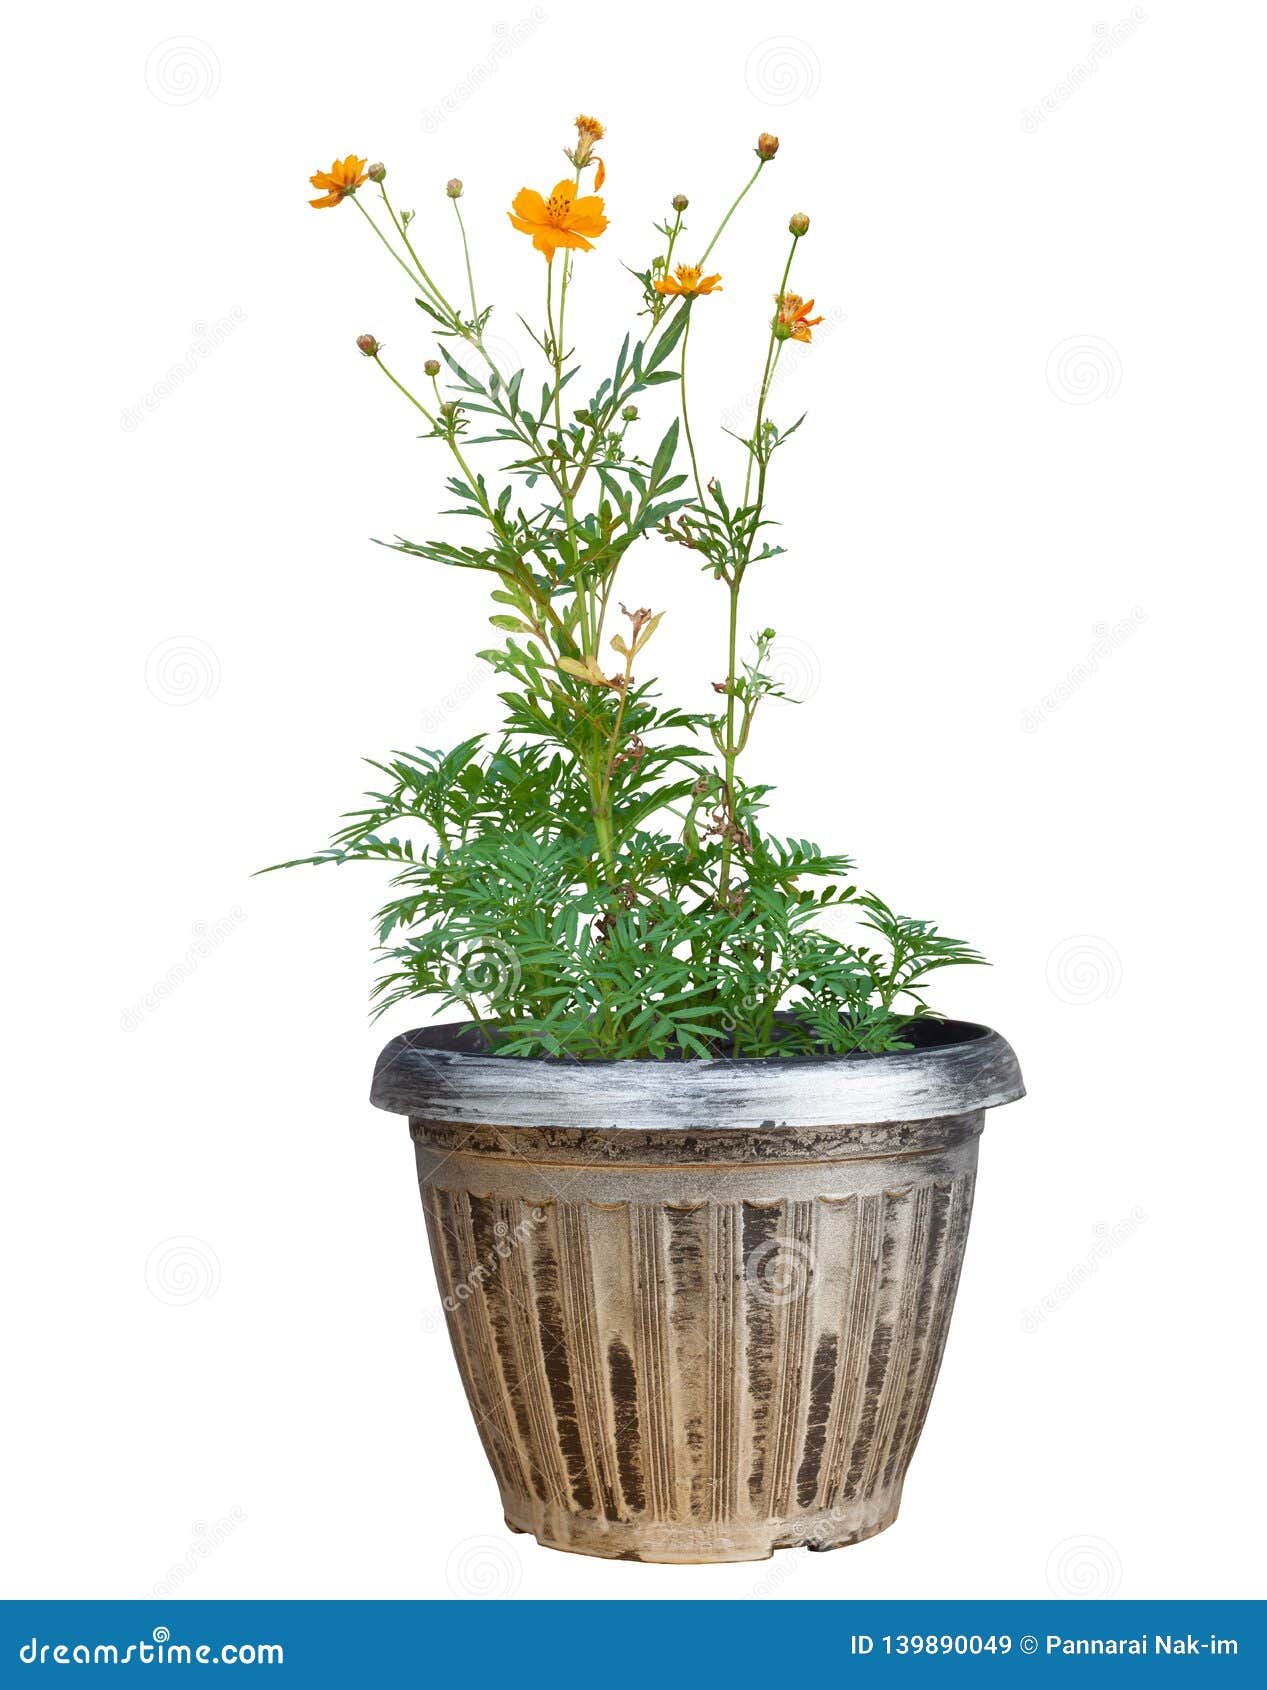 Beautiful Orange Cosmos Flower in Pot Isolated on White Background. Stock  Image - Image of blooming, cosmos: 139890049